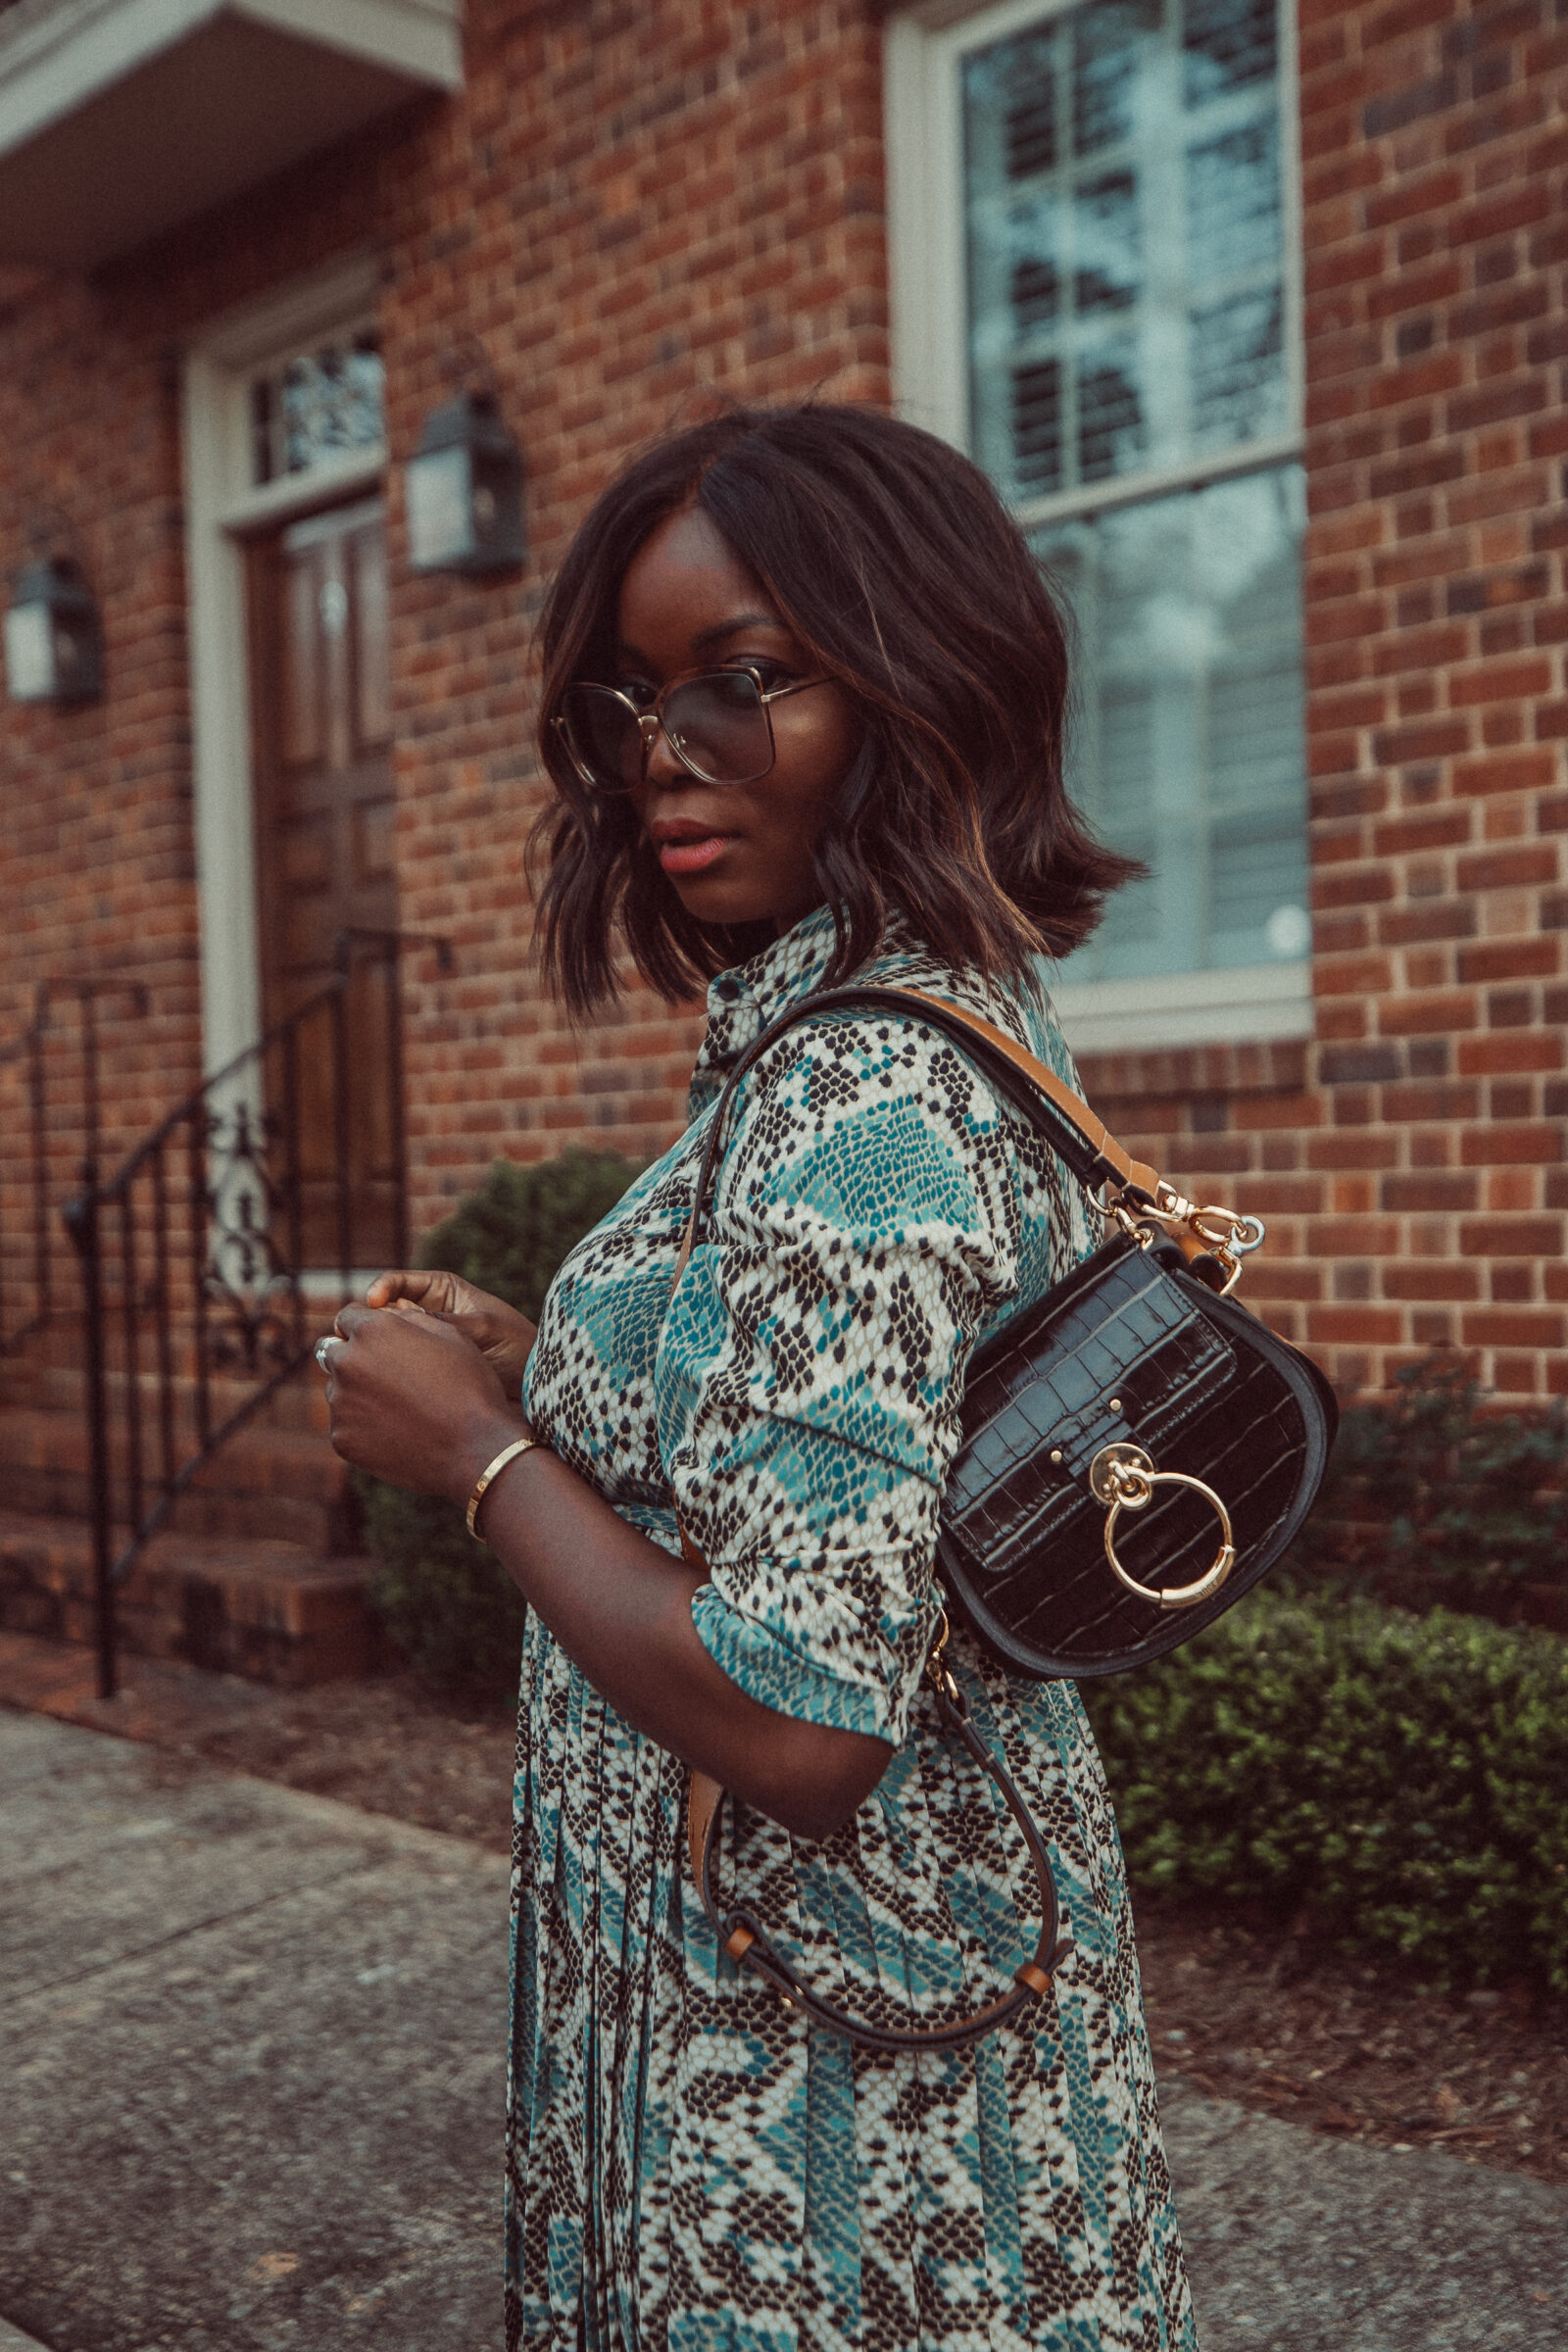 New in from Nordstrom: Chloé Tess Bag & Sunglasses » coco bassey